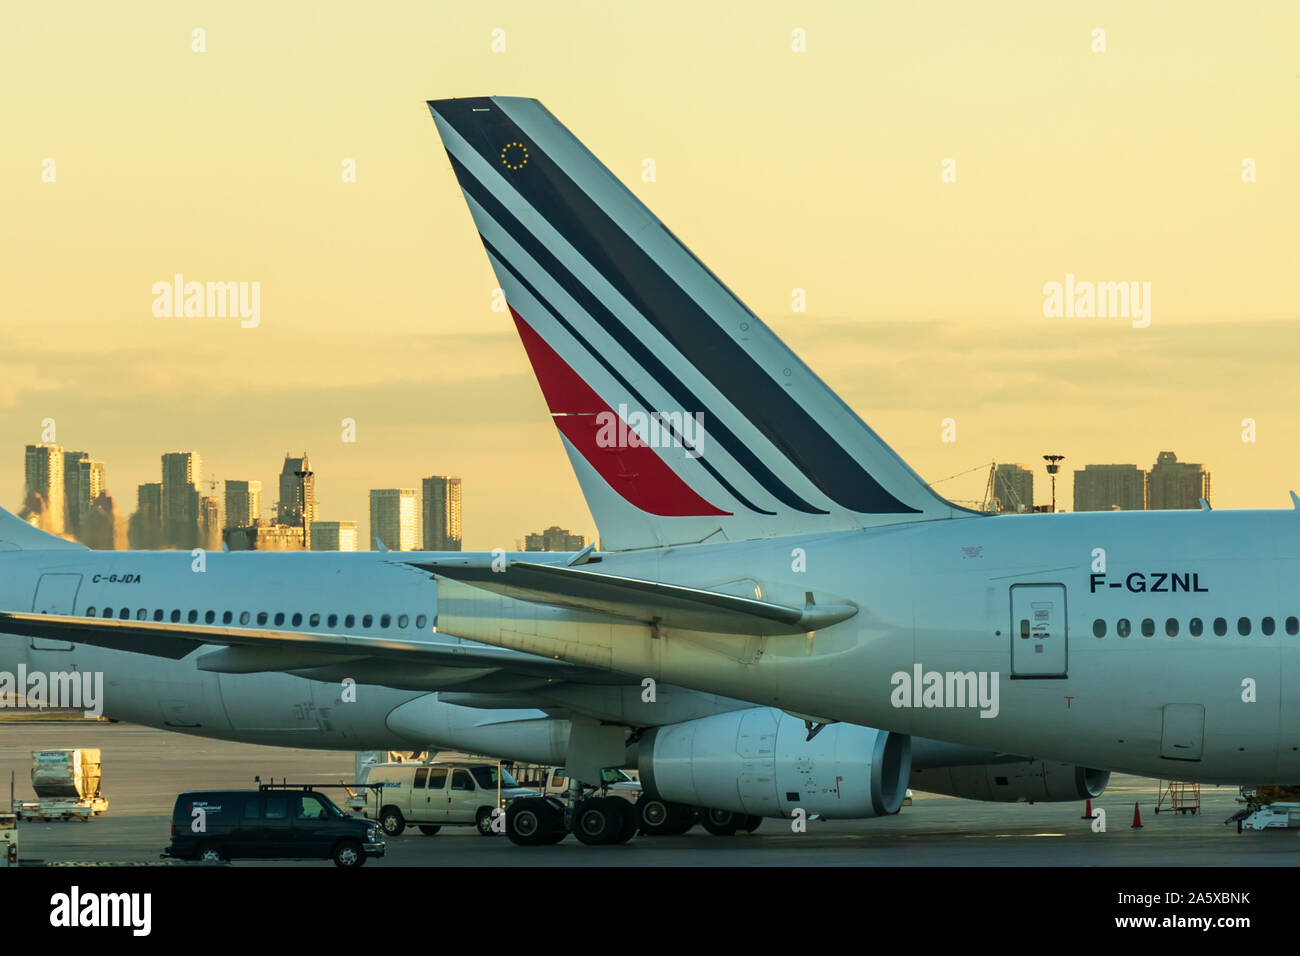 Tail of Air France Boeing 777-3 (F-GZNL) while at a gate during sunset at Toronto Pearson Intl. Airport. Stock Photo